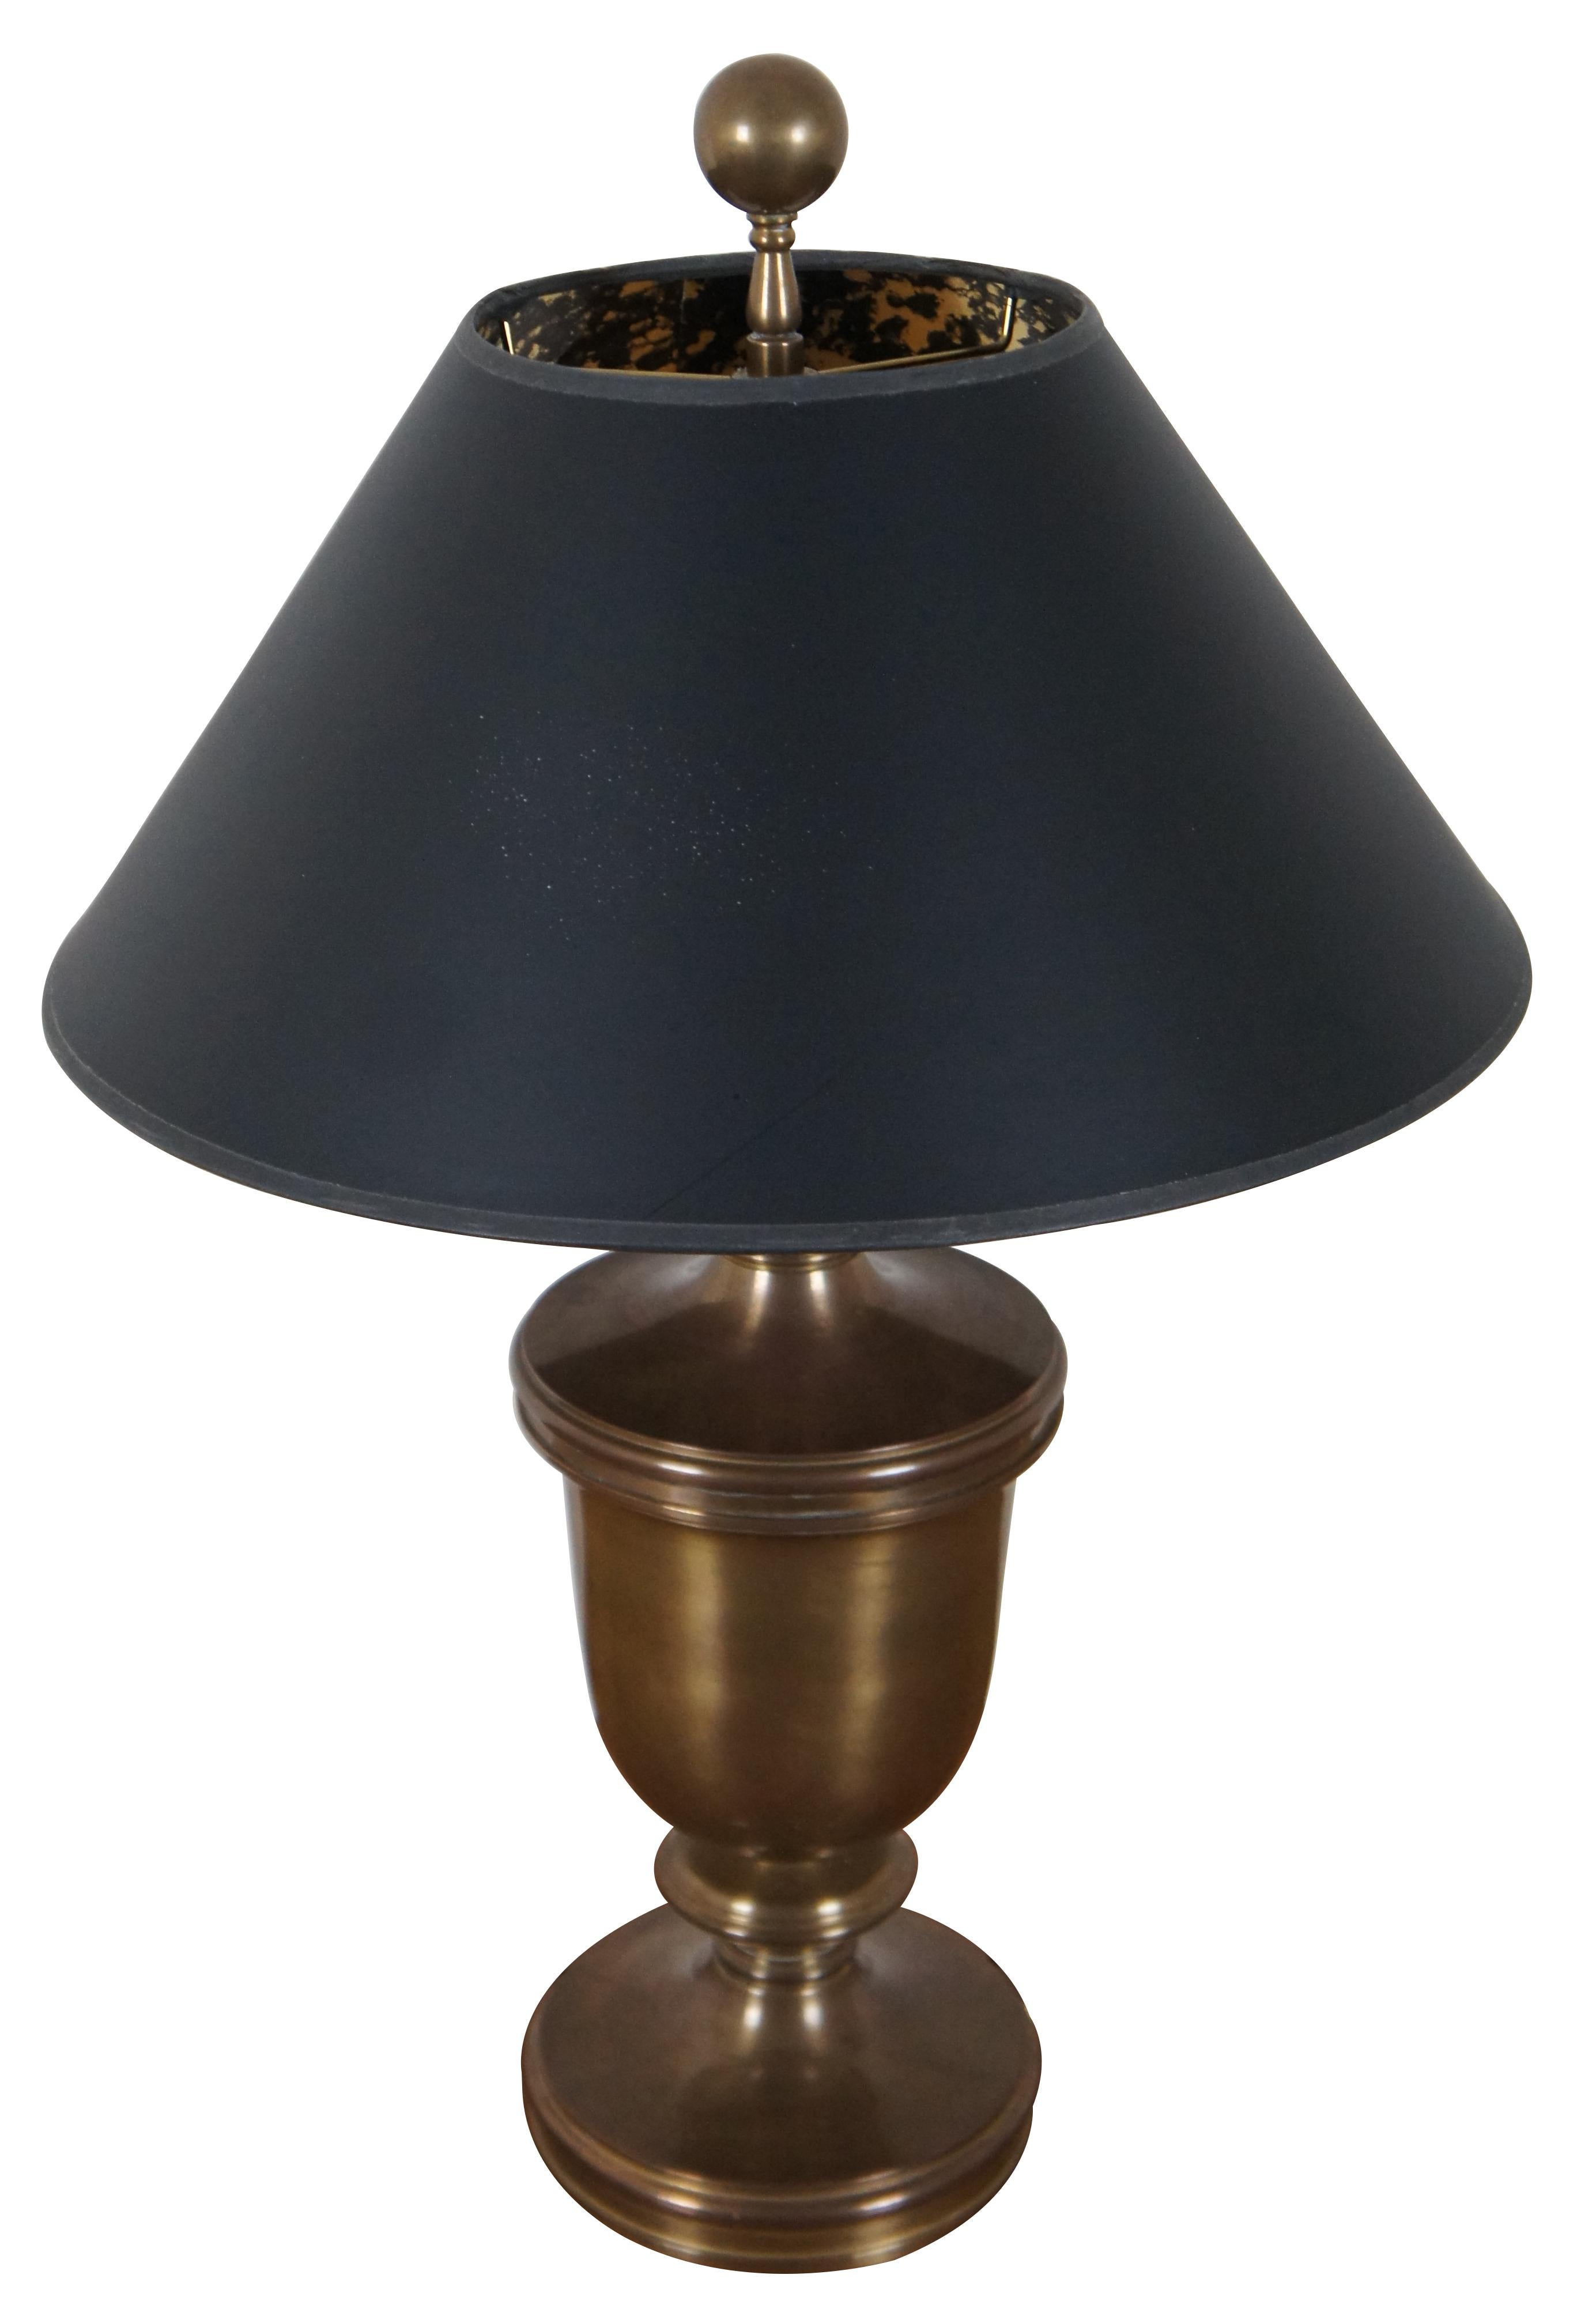 Vintage Chapman Brass classical urn shaped table lamp with two lights, ball shaped finial, and black shade with foil interior.

Measures: 6.25” x 23.25” / Shade - 15” x 8” (Diameter x Height).